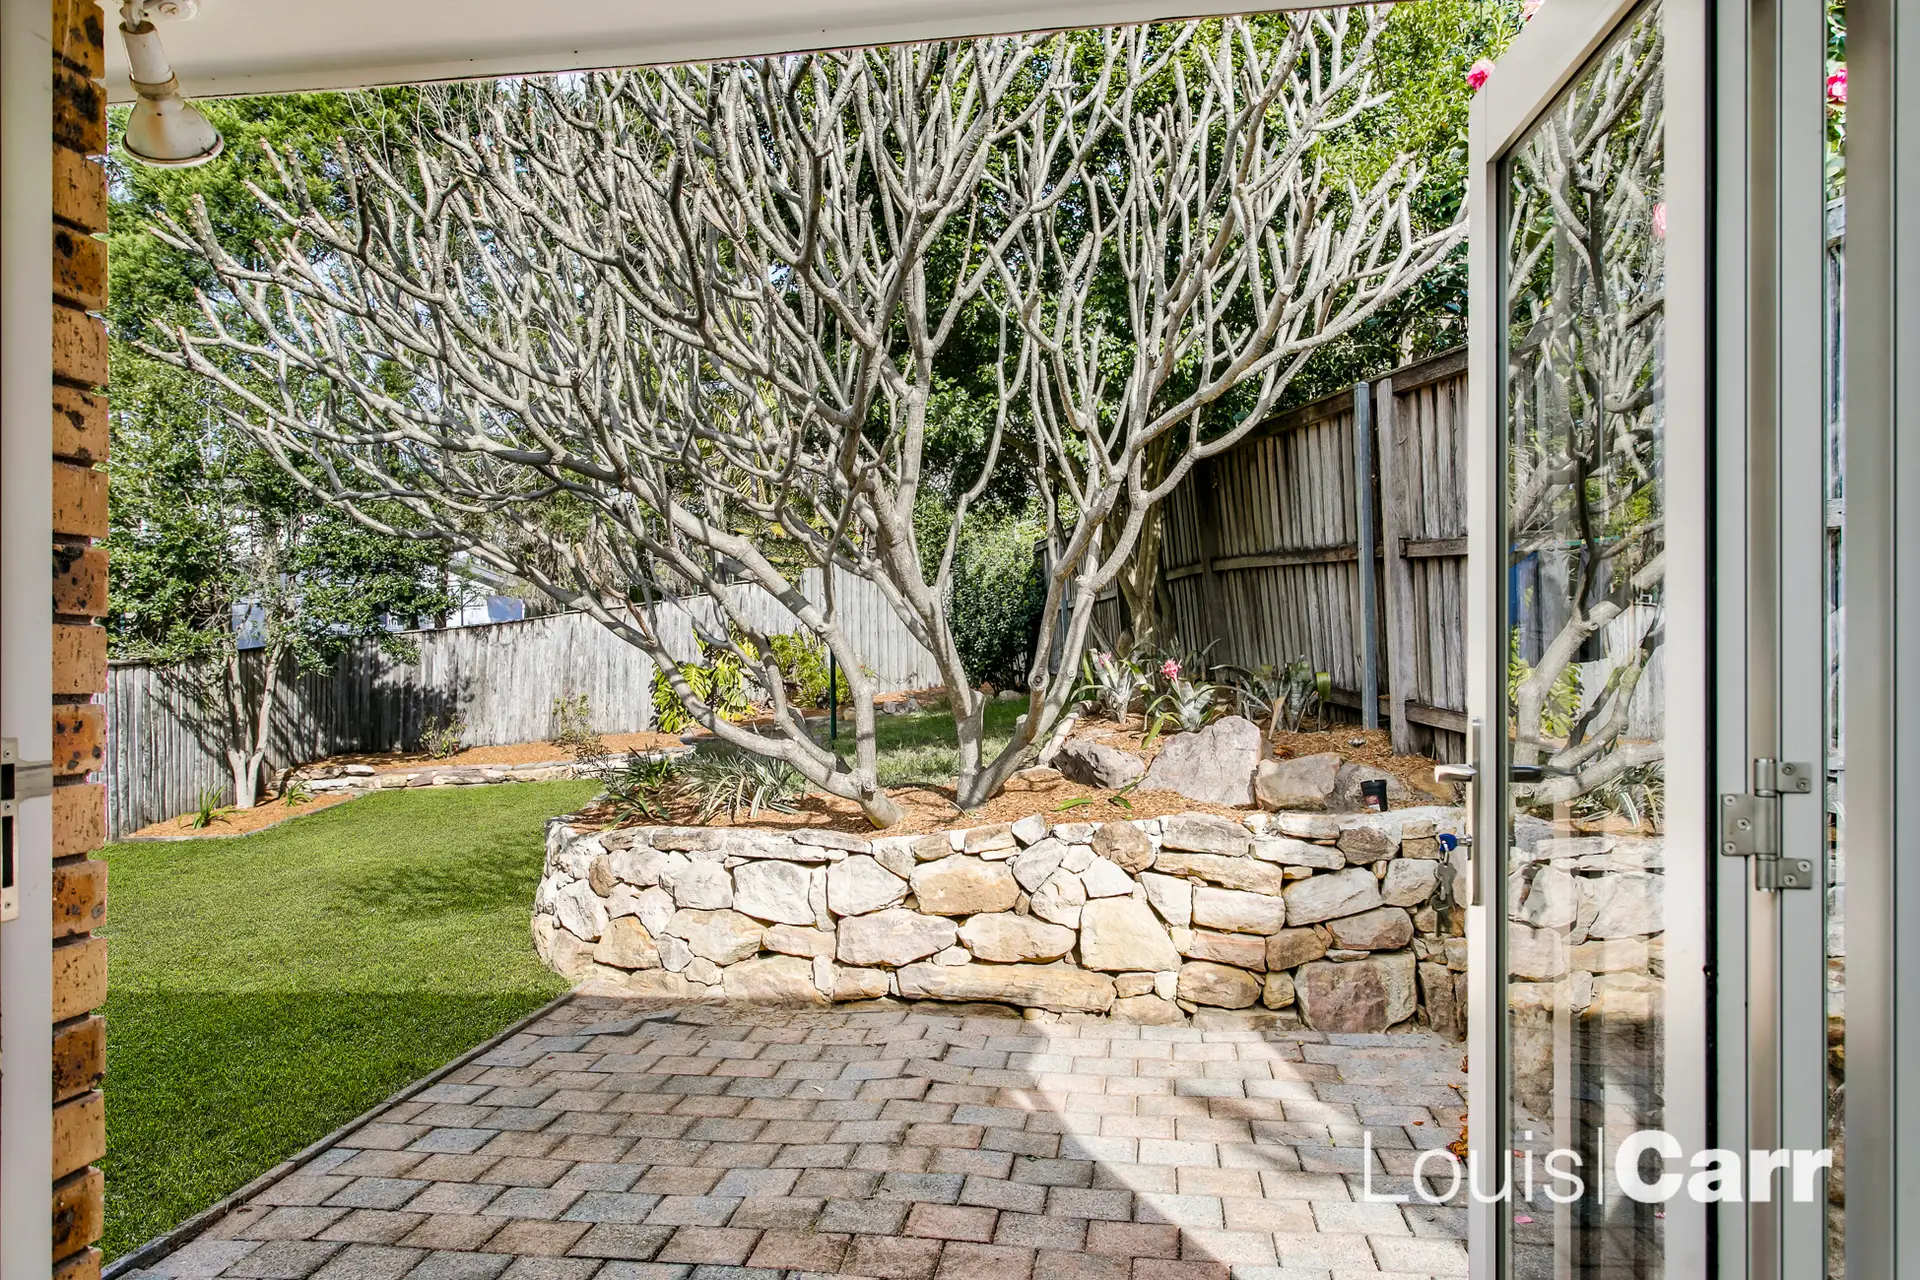 1/228 Purchase Road, Cherrybrook Sold by Louis Carr Real Estate - image 3